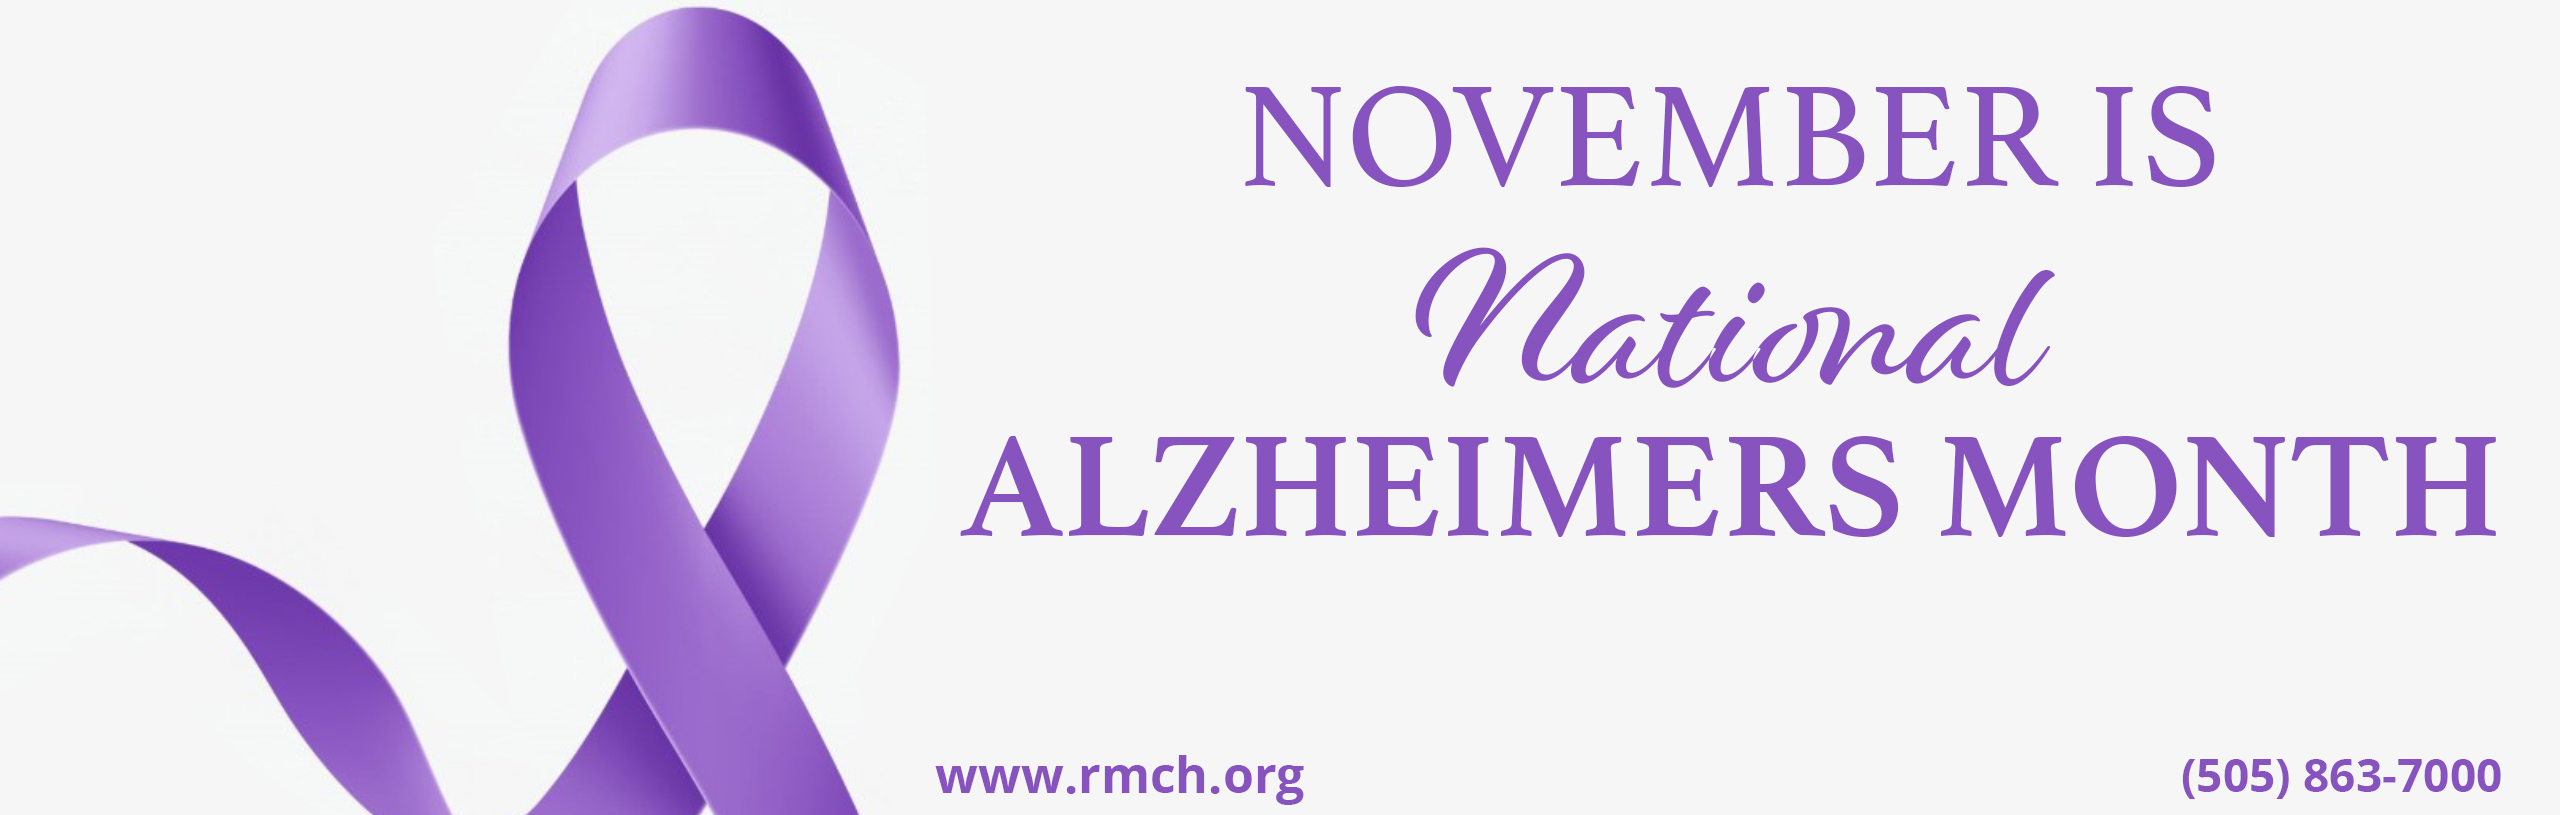 November is National ALZHEIMERS MONTH
www.rmch.org
(505) 863-7000